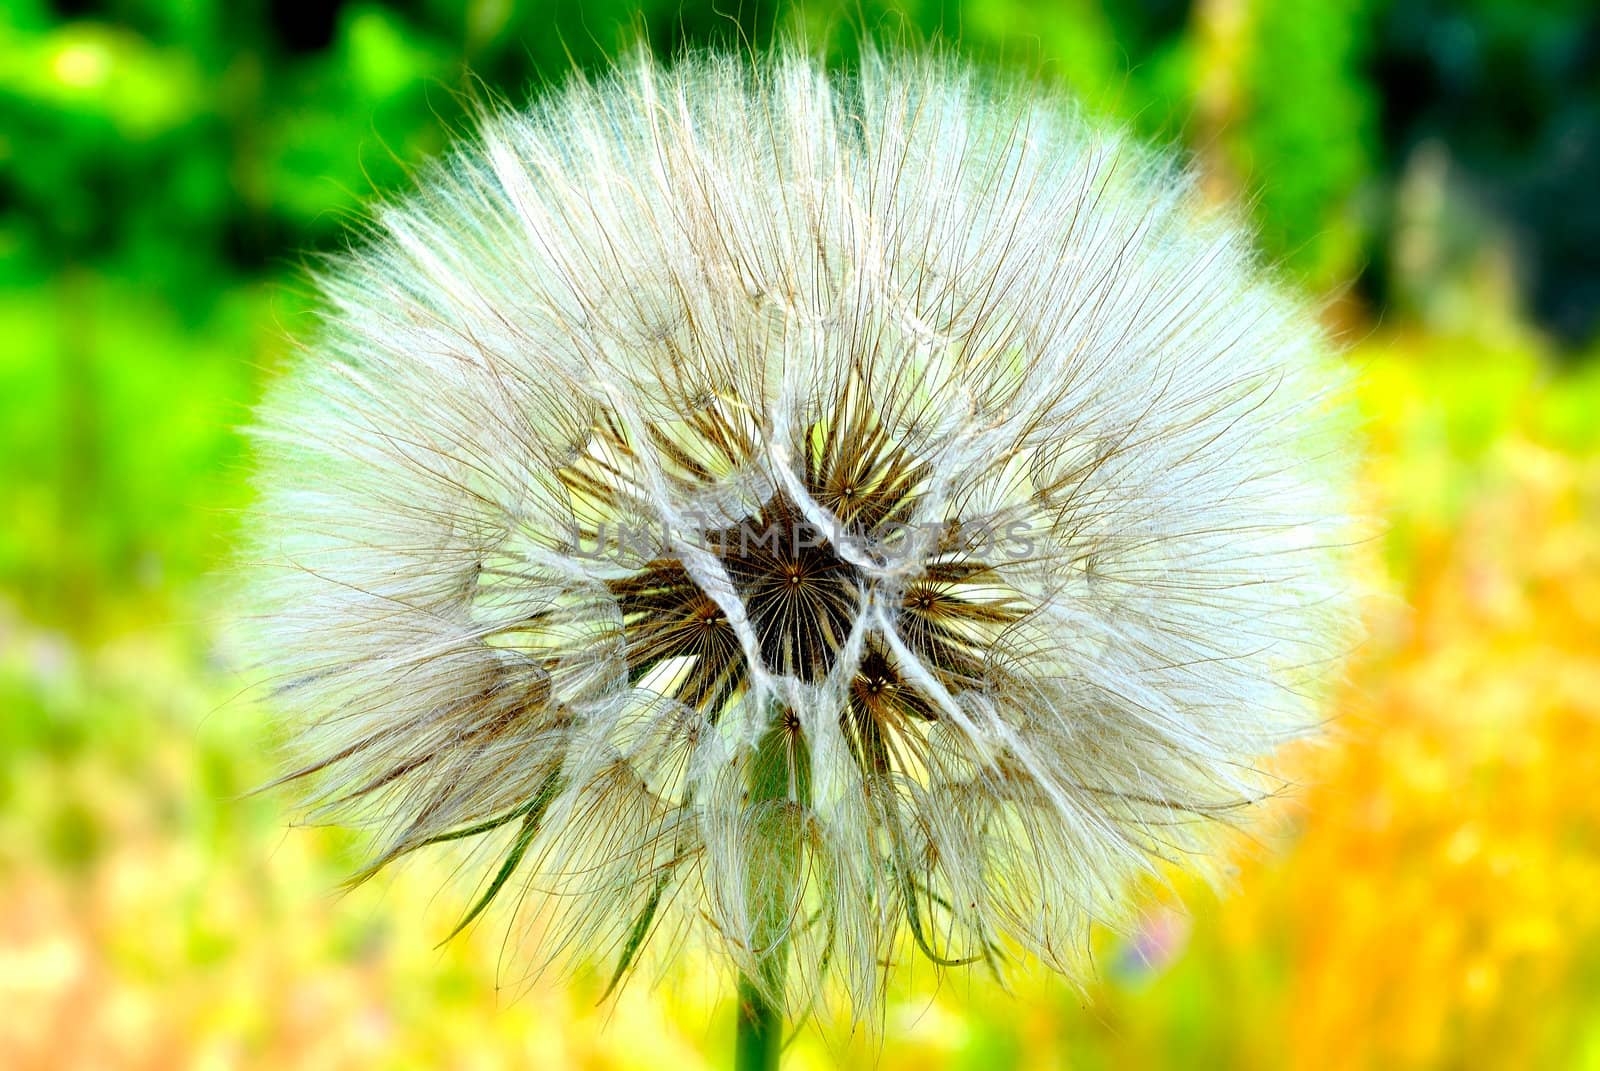 Dandelion is white and fluffy on the yellow-green background